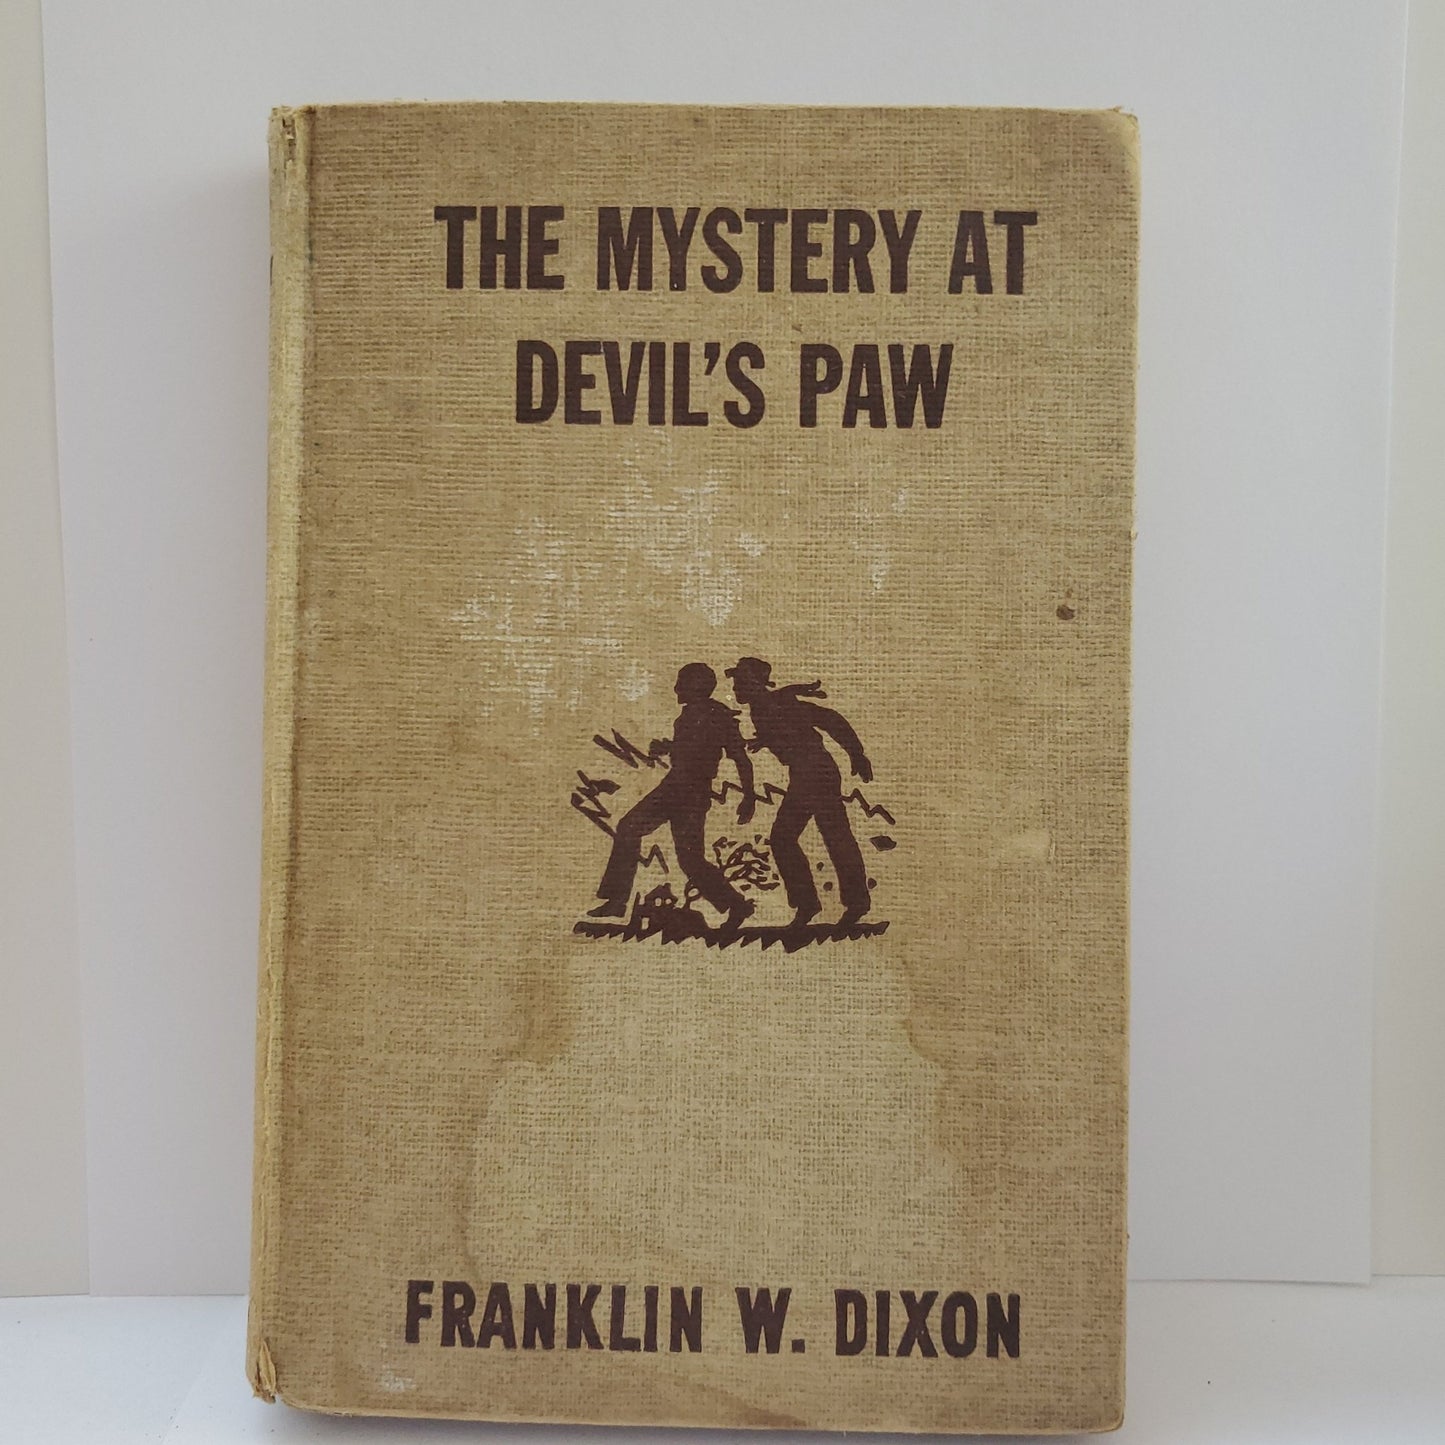 The Mystery At Devil's Paw - [ash-ling] Booksellers